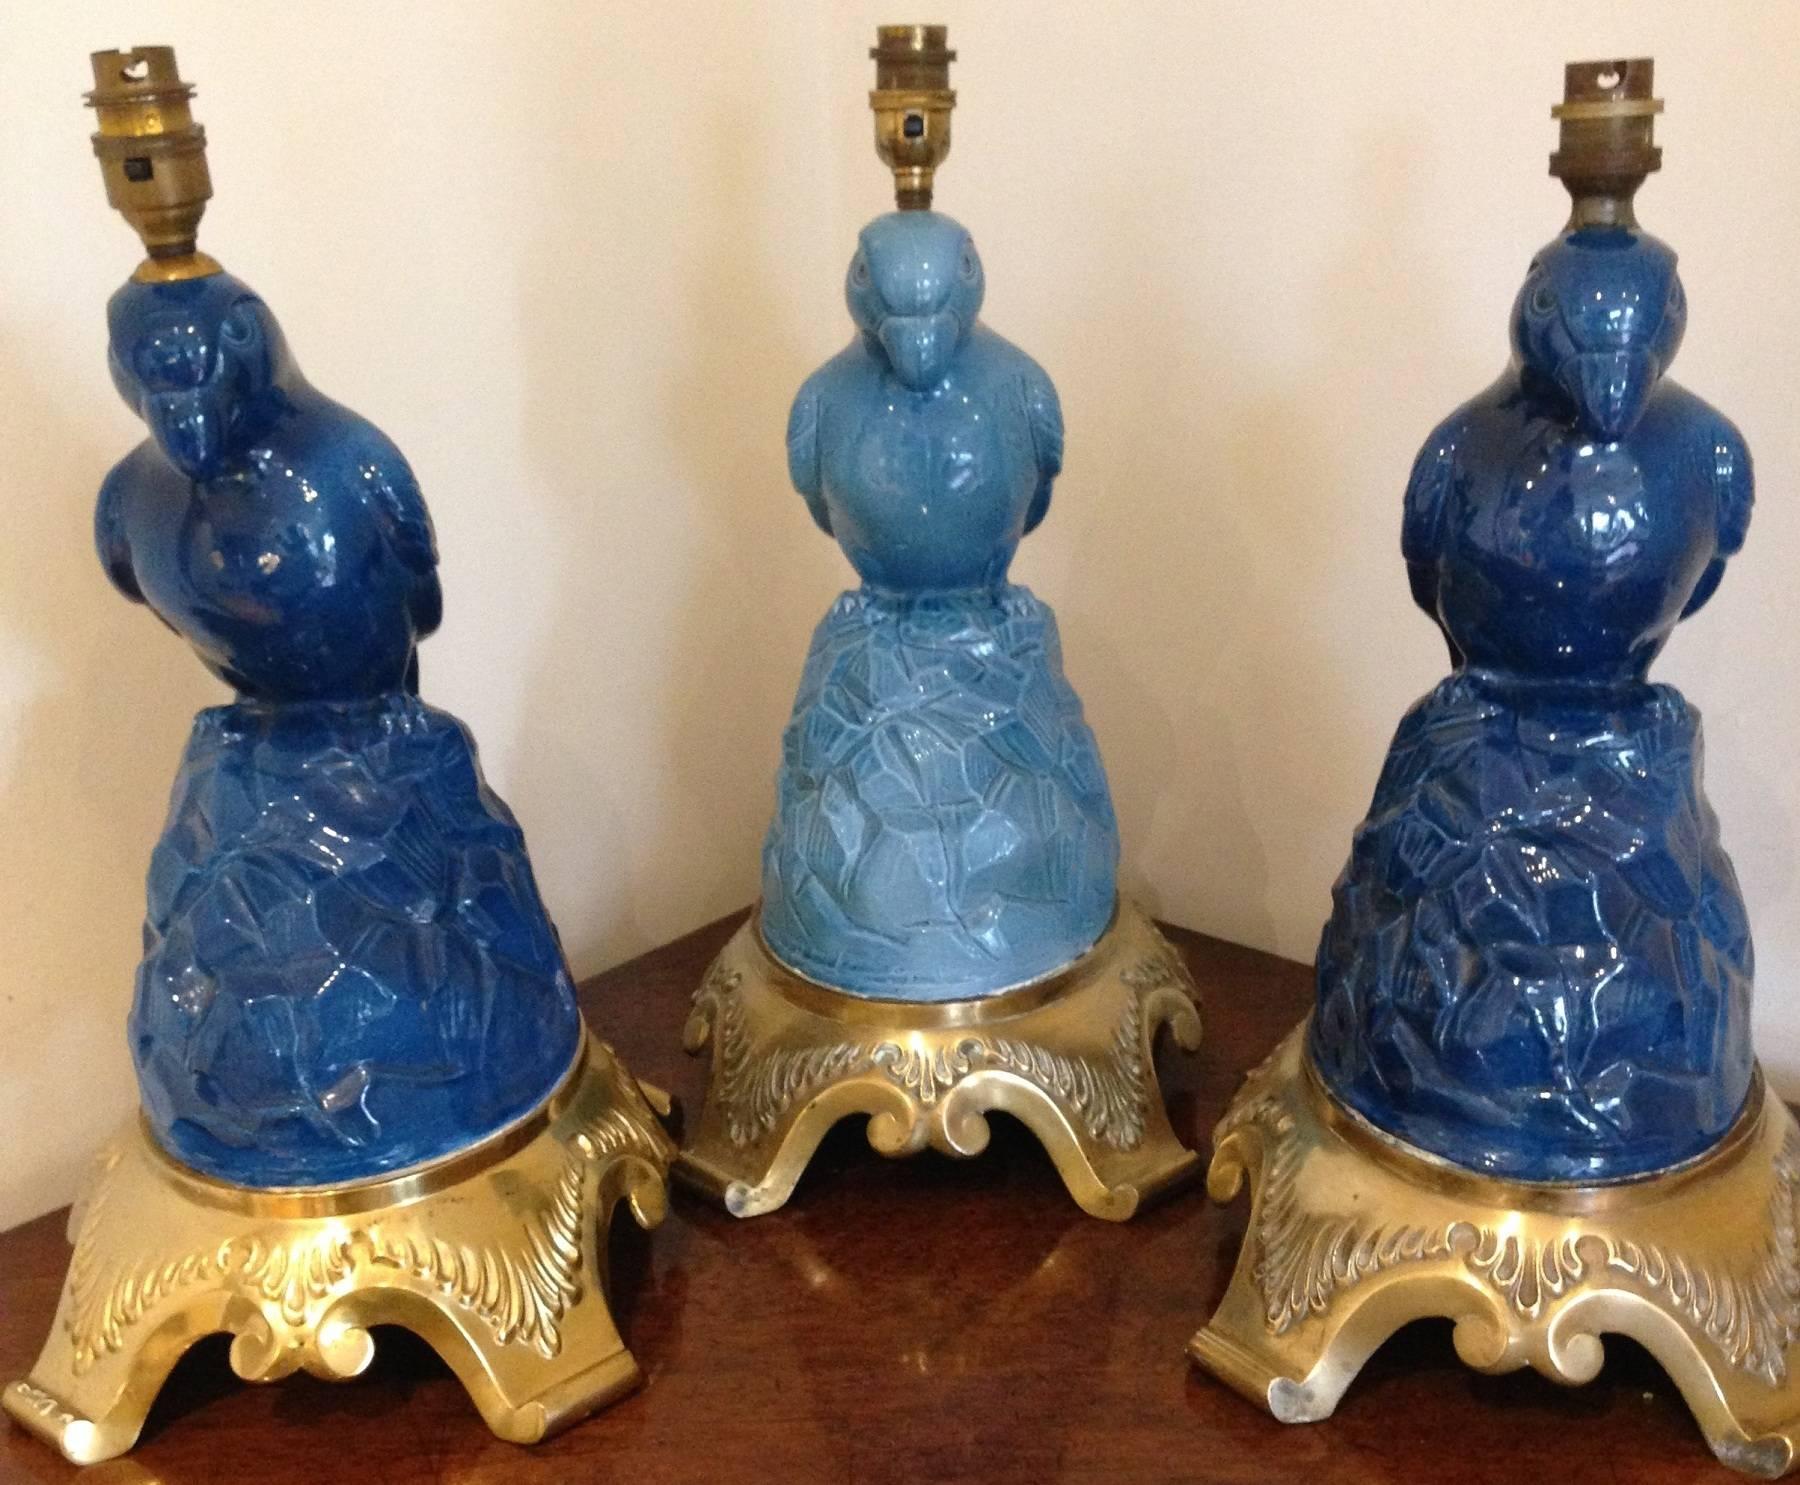 A set of three blue(two matching, one lighter) glazed porcelain lamps in the form of stylized parrots, resting on fine. Cast heavy gilded bronze mounts. No visible signs of factory marks.